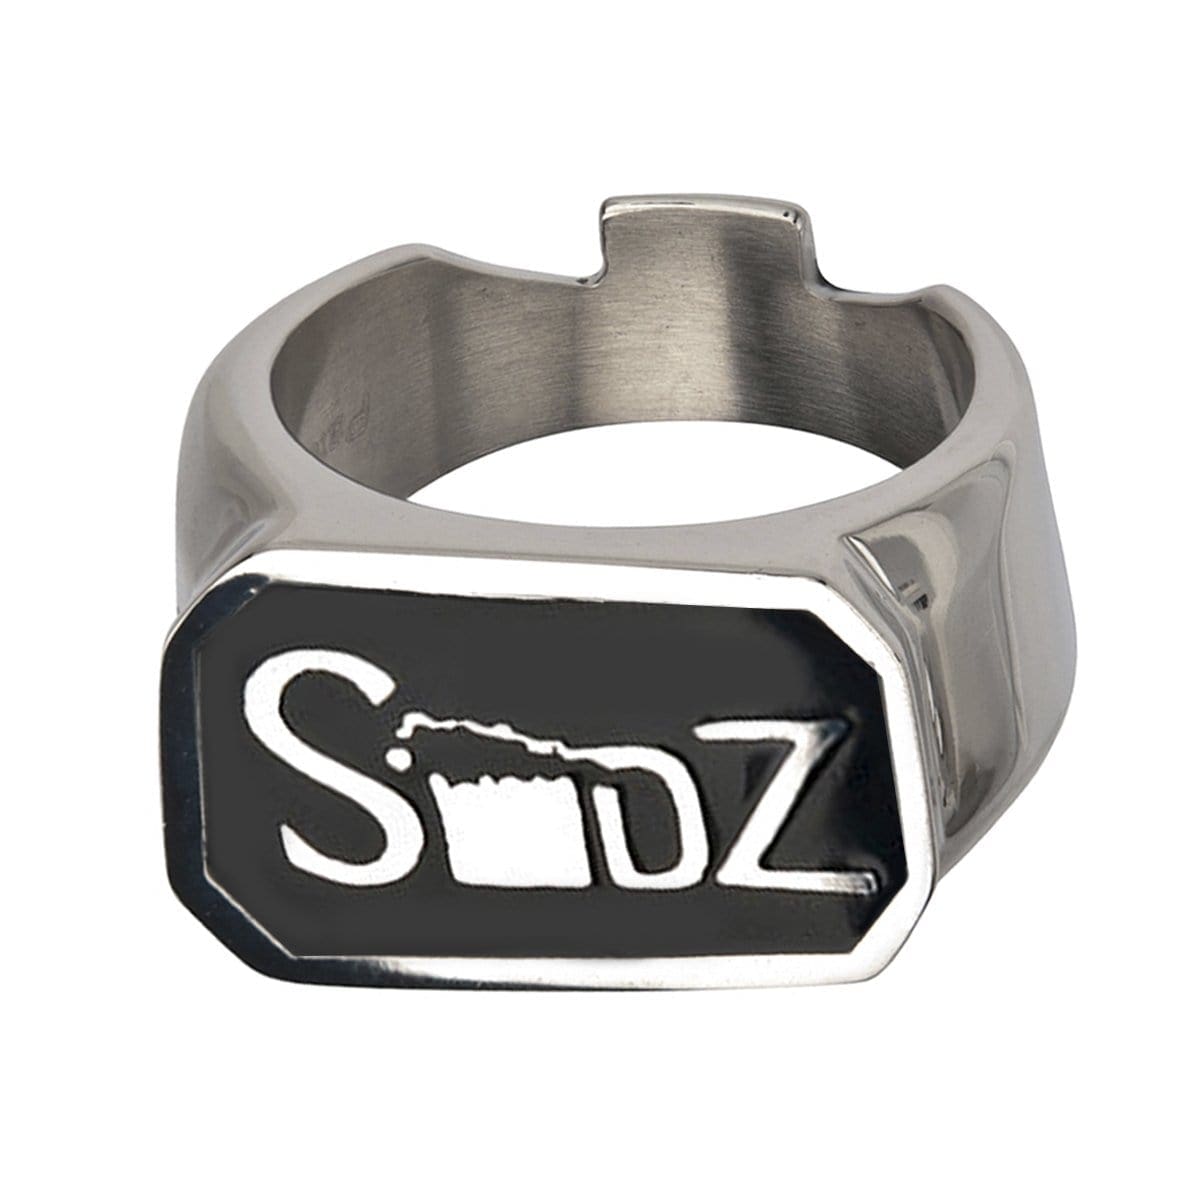 INOX JEWELRY Rings Black and Silver Tone Stainless Steel SDZ Bottle Opener Ring